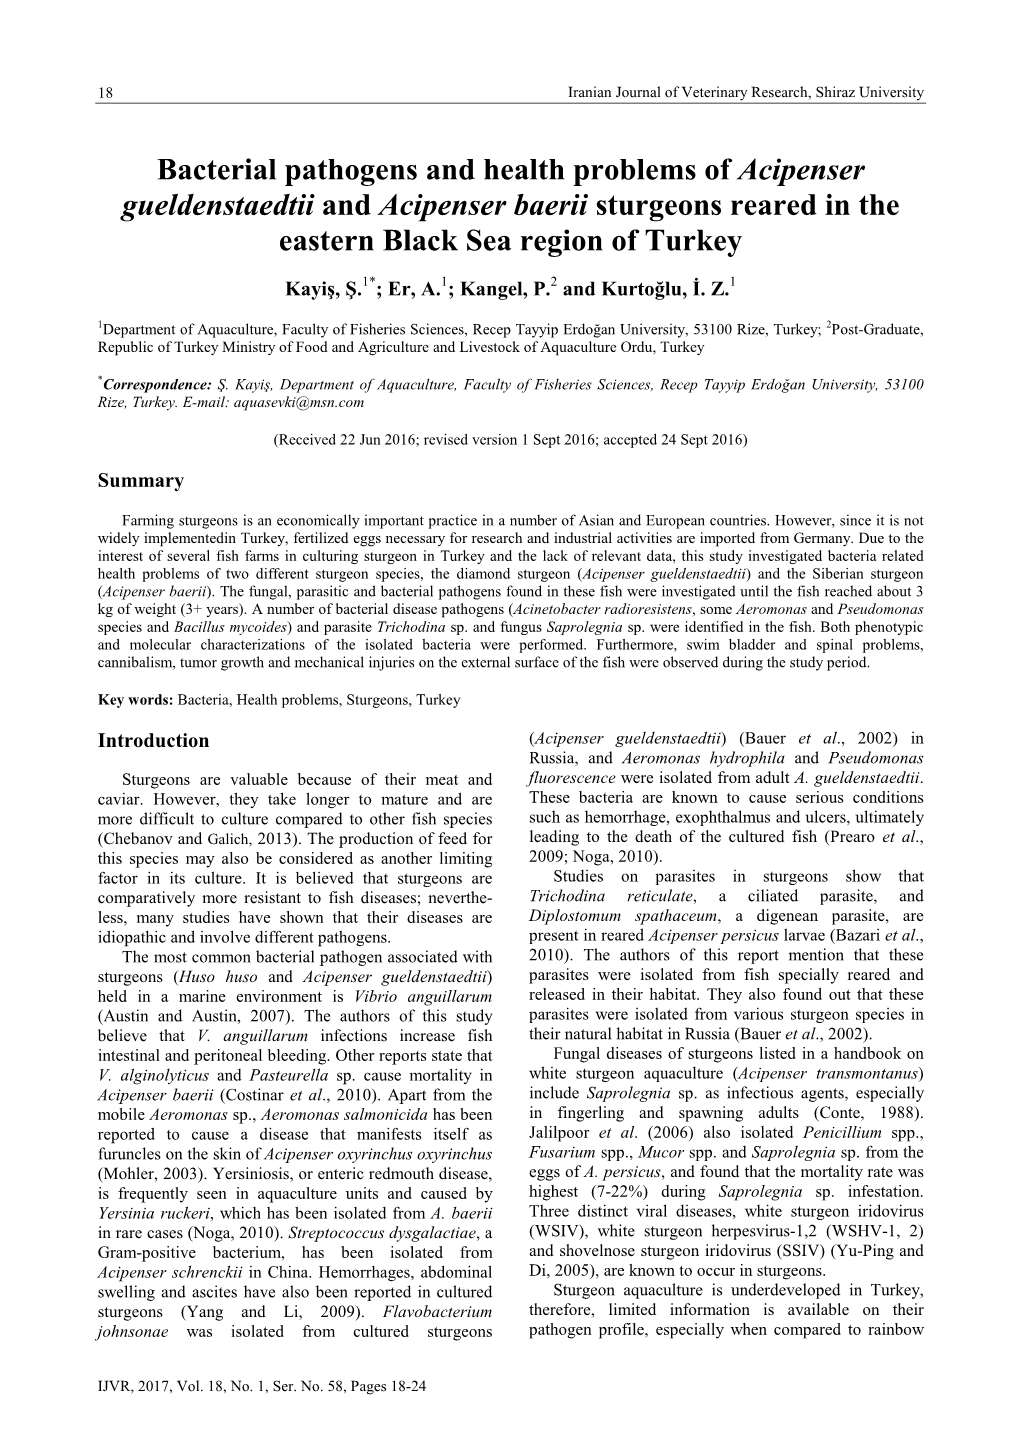 Bacterial Pathogens and Health Problems of Acipenser Gueldenstaedtii and Acipenser Baerii Sturgeons Reared in the Eastern Black Sea Region of Turkey